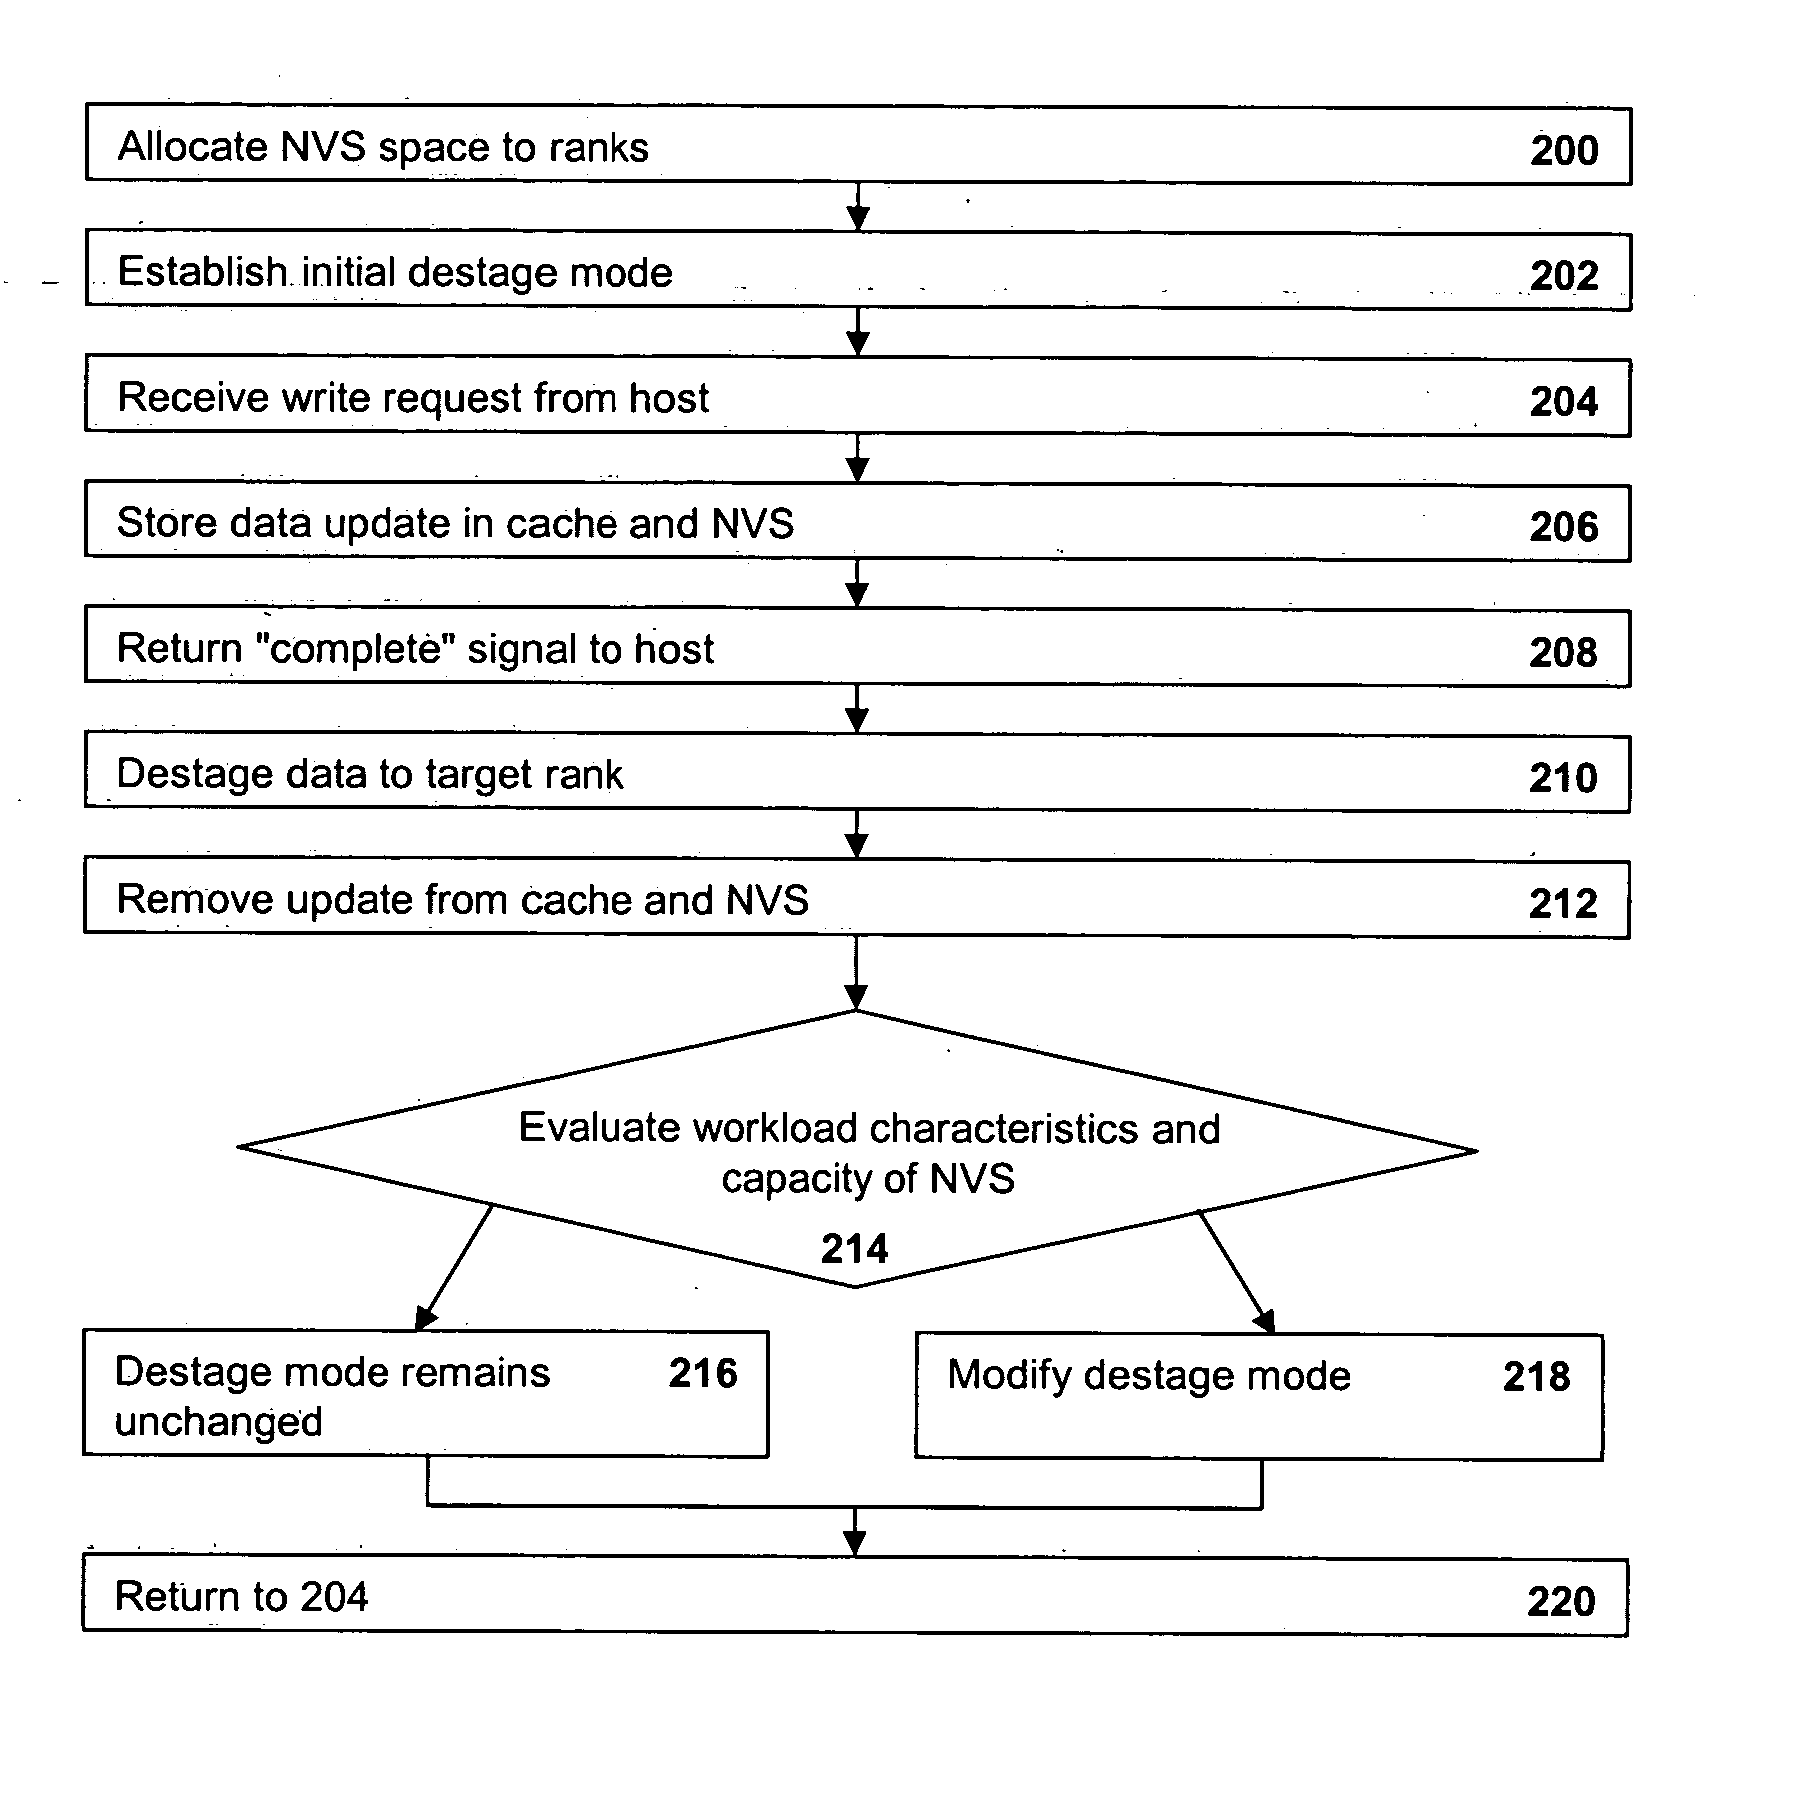 Increasing through-put of a storage controller by autonomically adjusting host delay